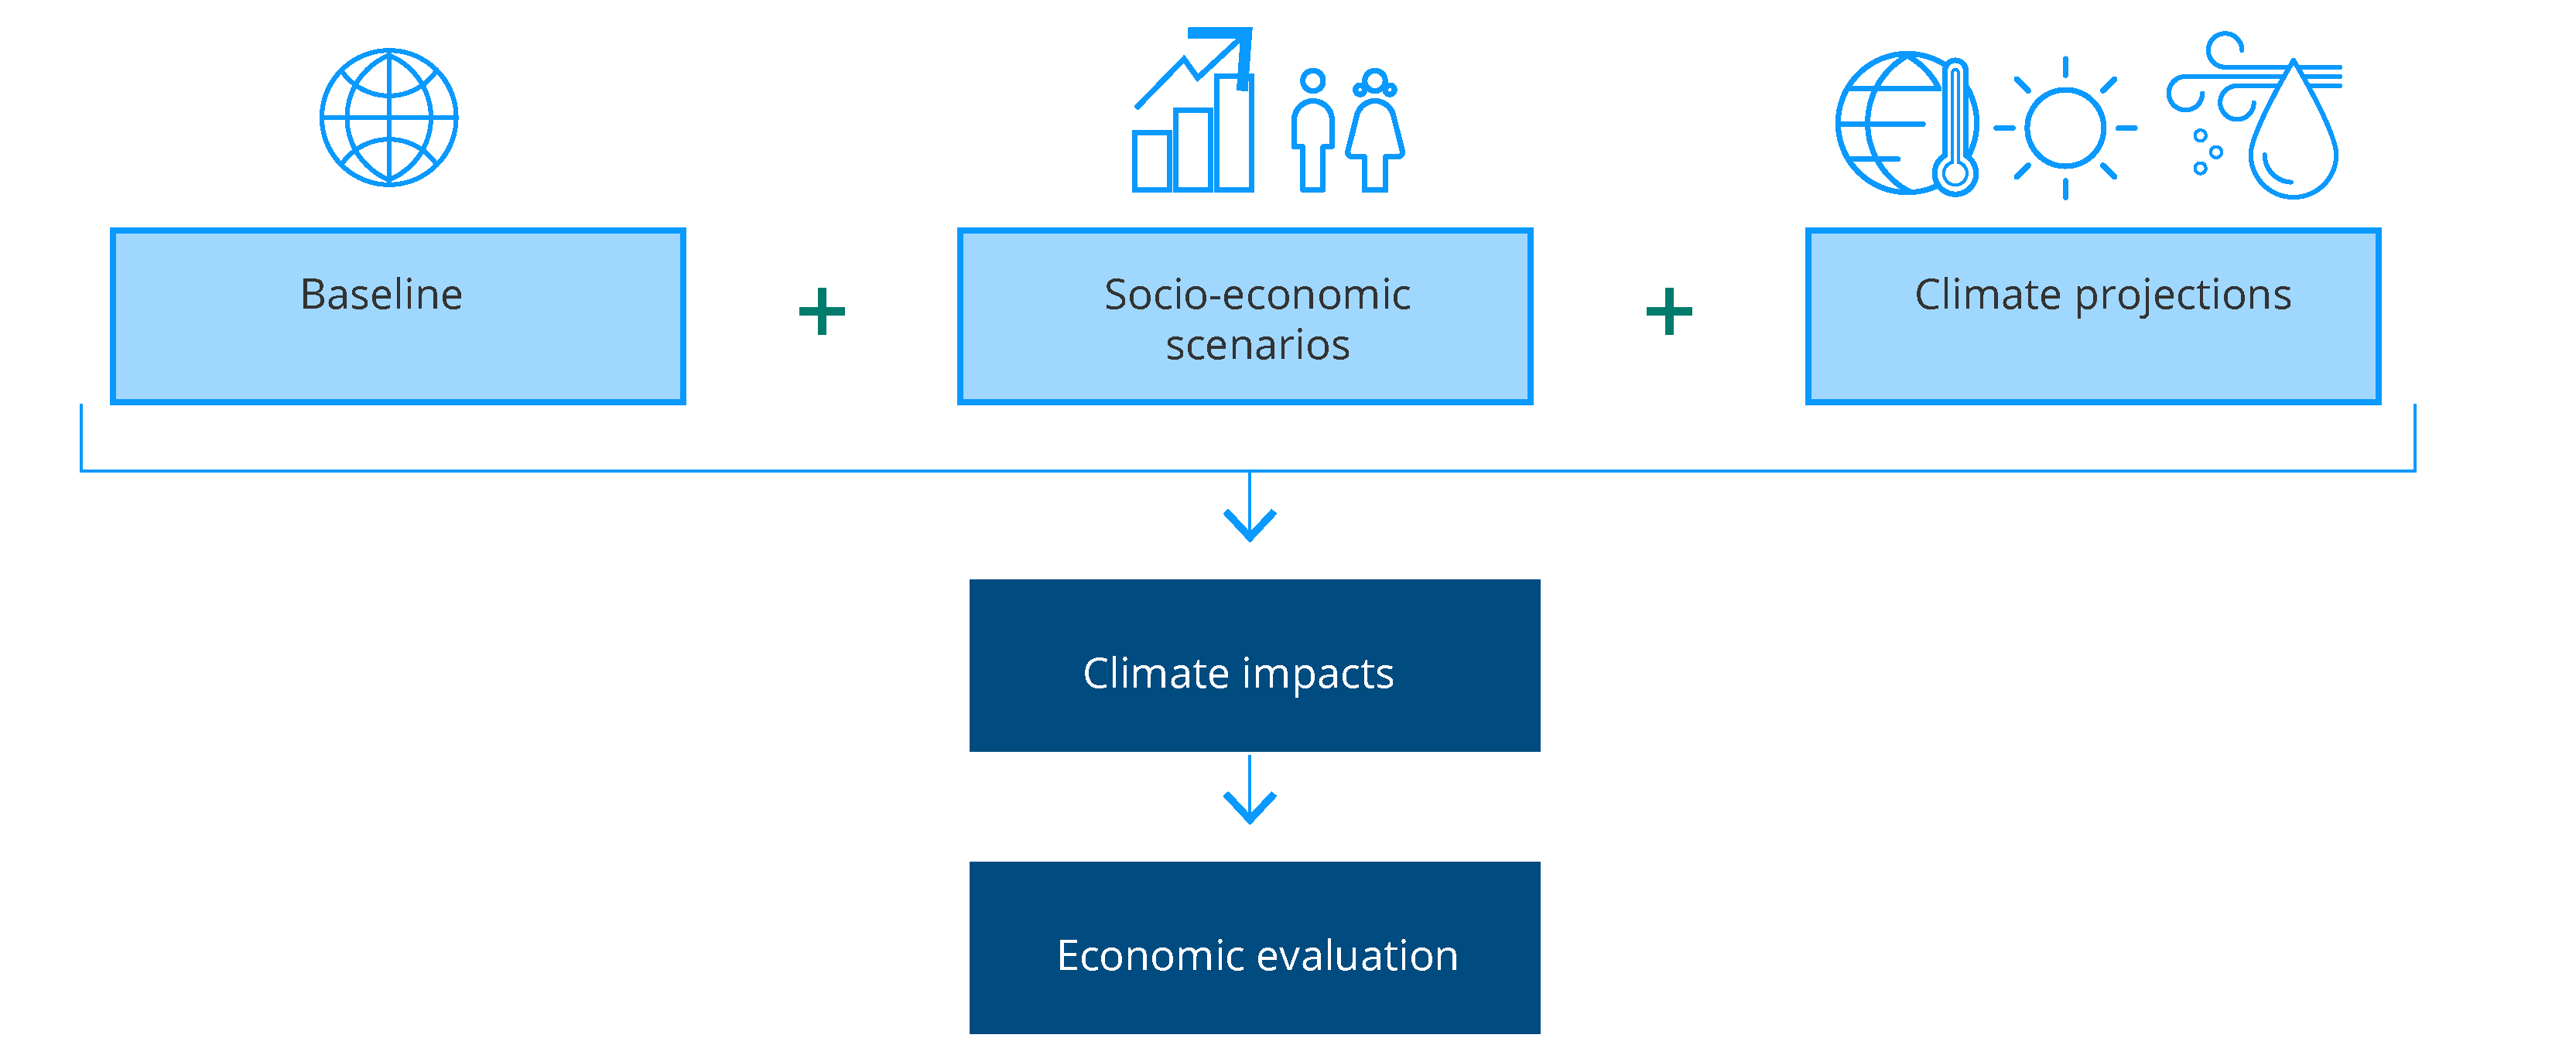 Estimating the cost of inaction based on climate scenarios, climate impacts and economic models